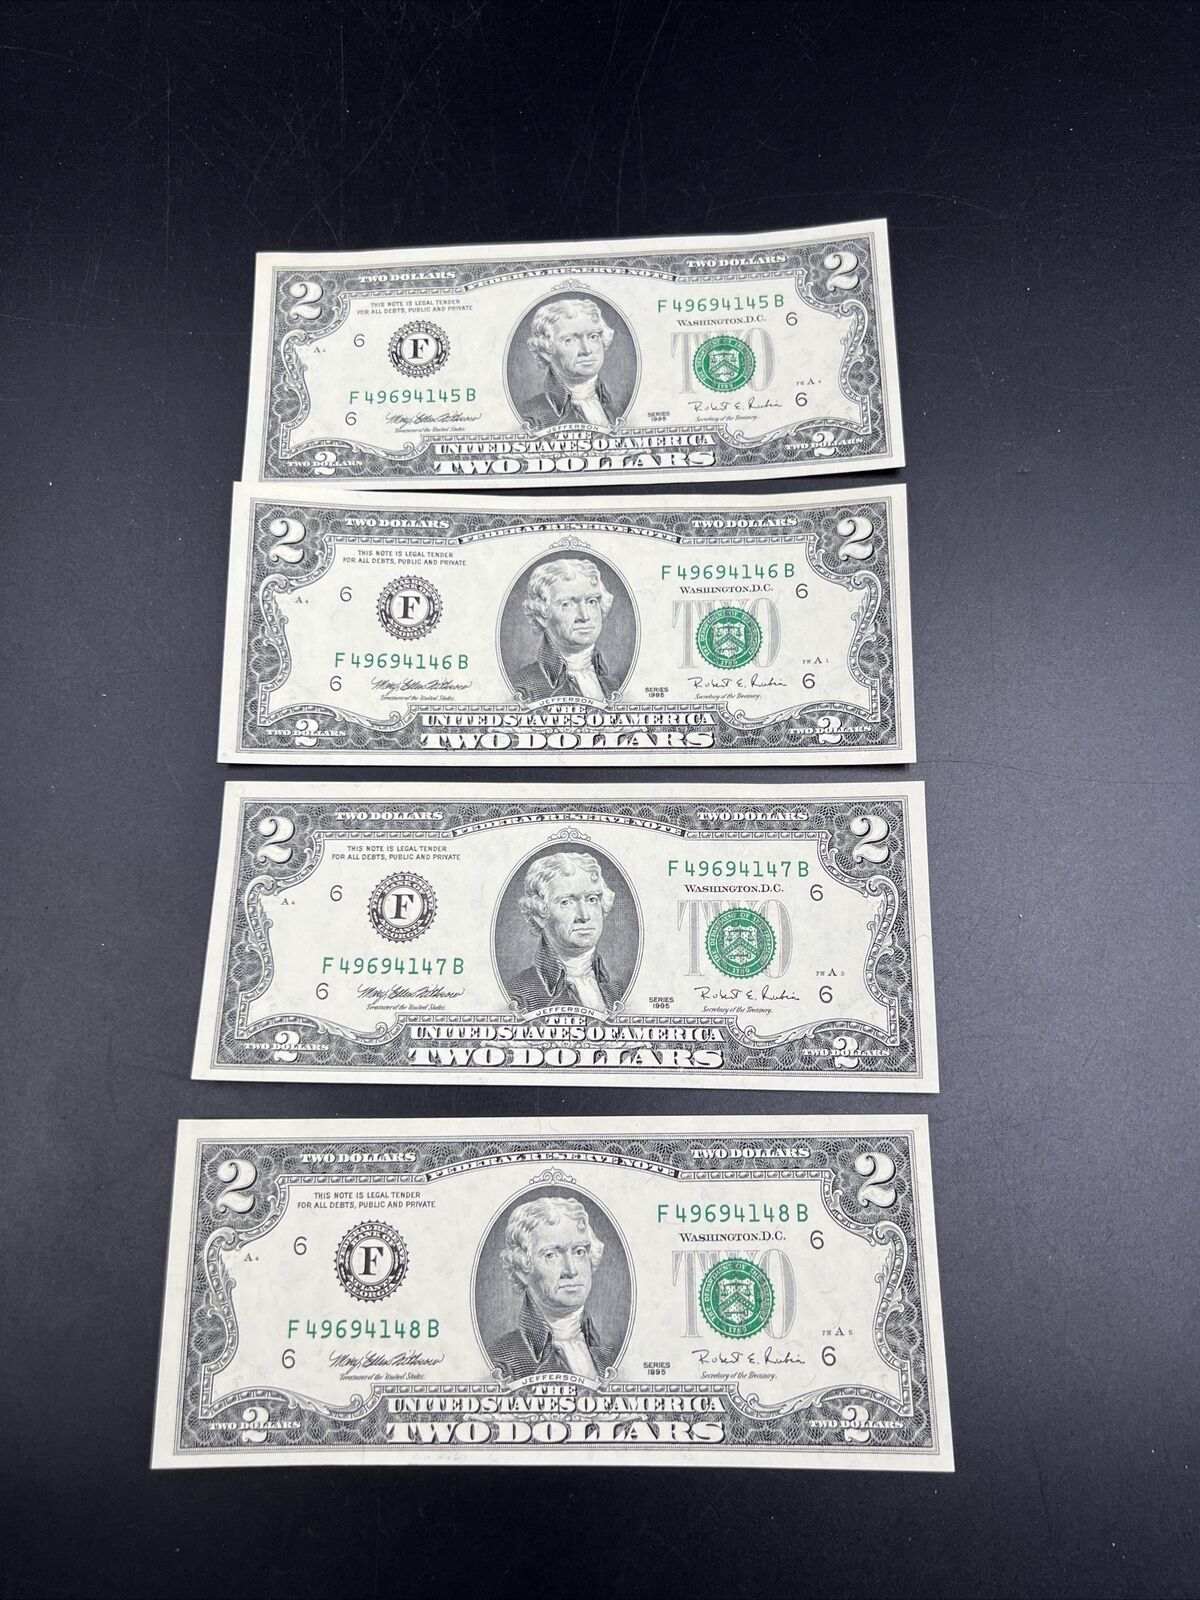 4 Consecutive 1995 $2 Two Dollar FRN Note Bills Choice UNC US Currency Banknotes